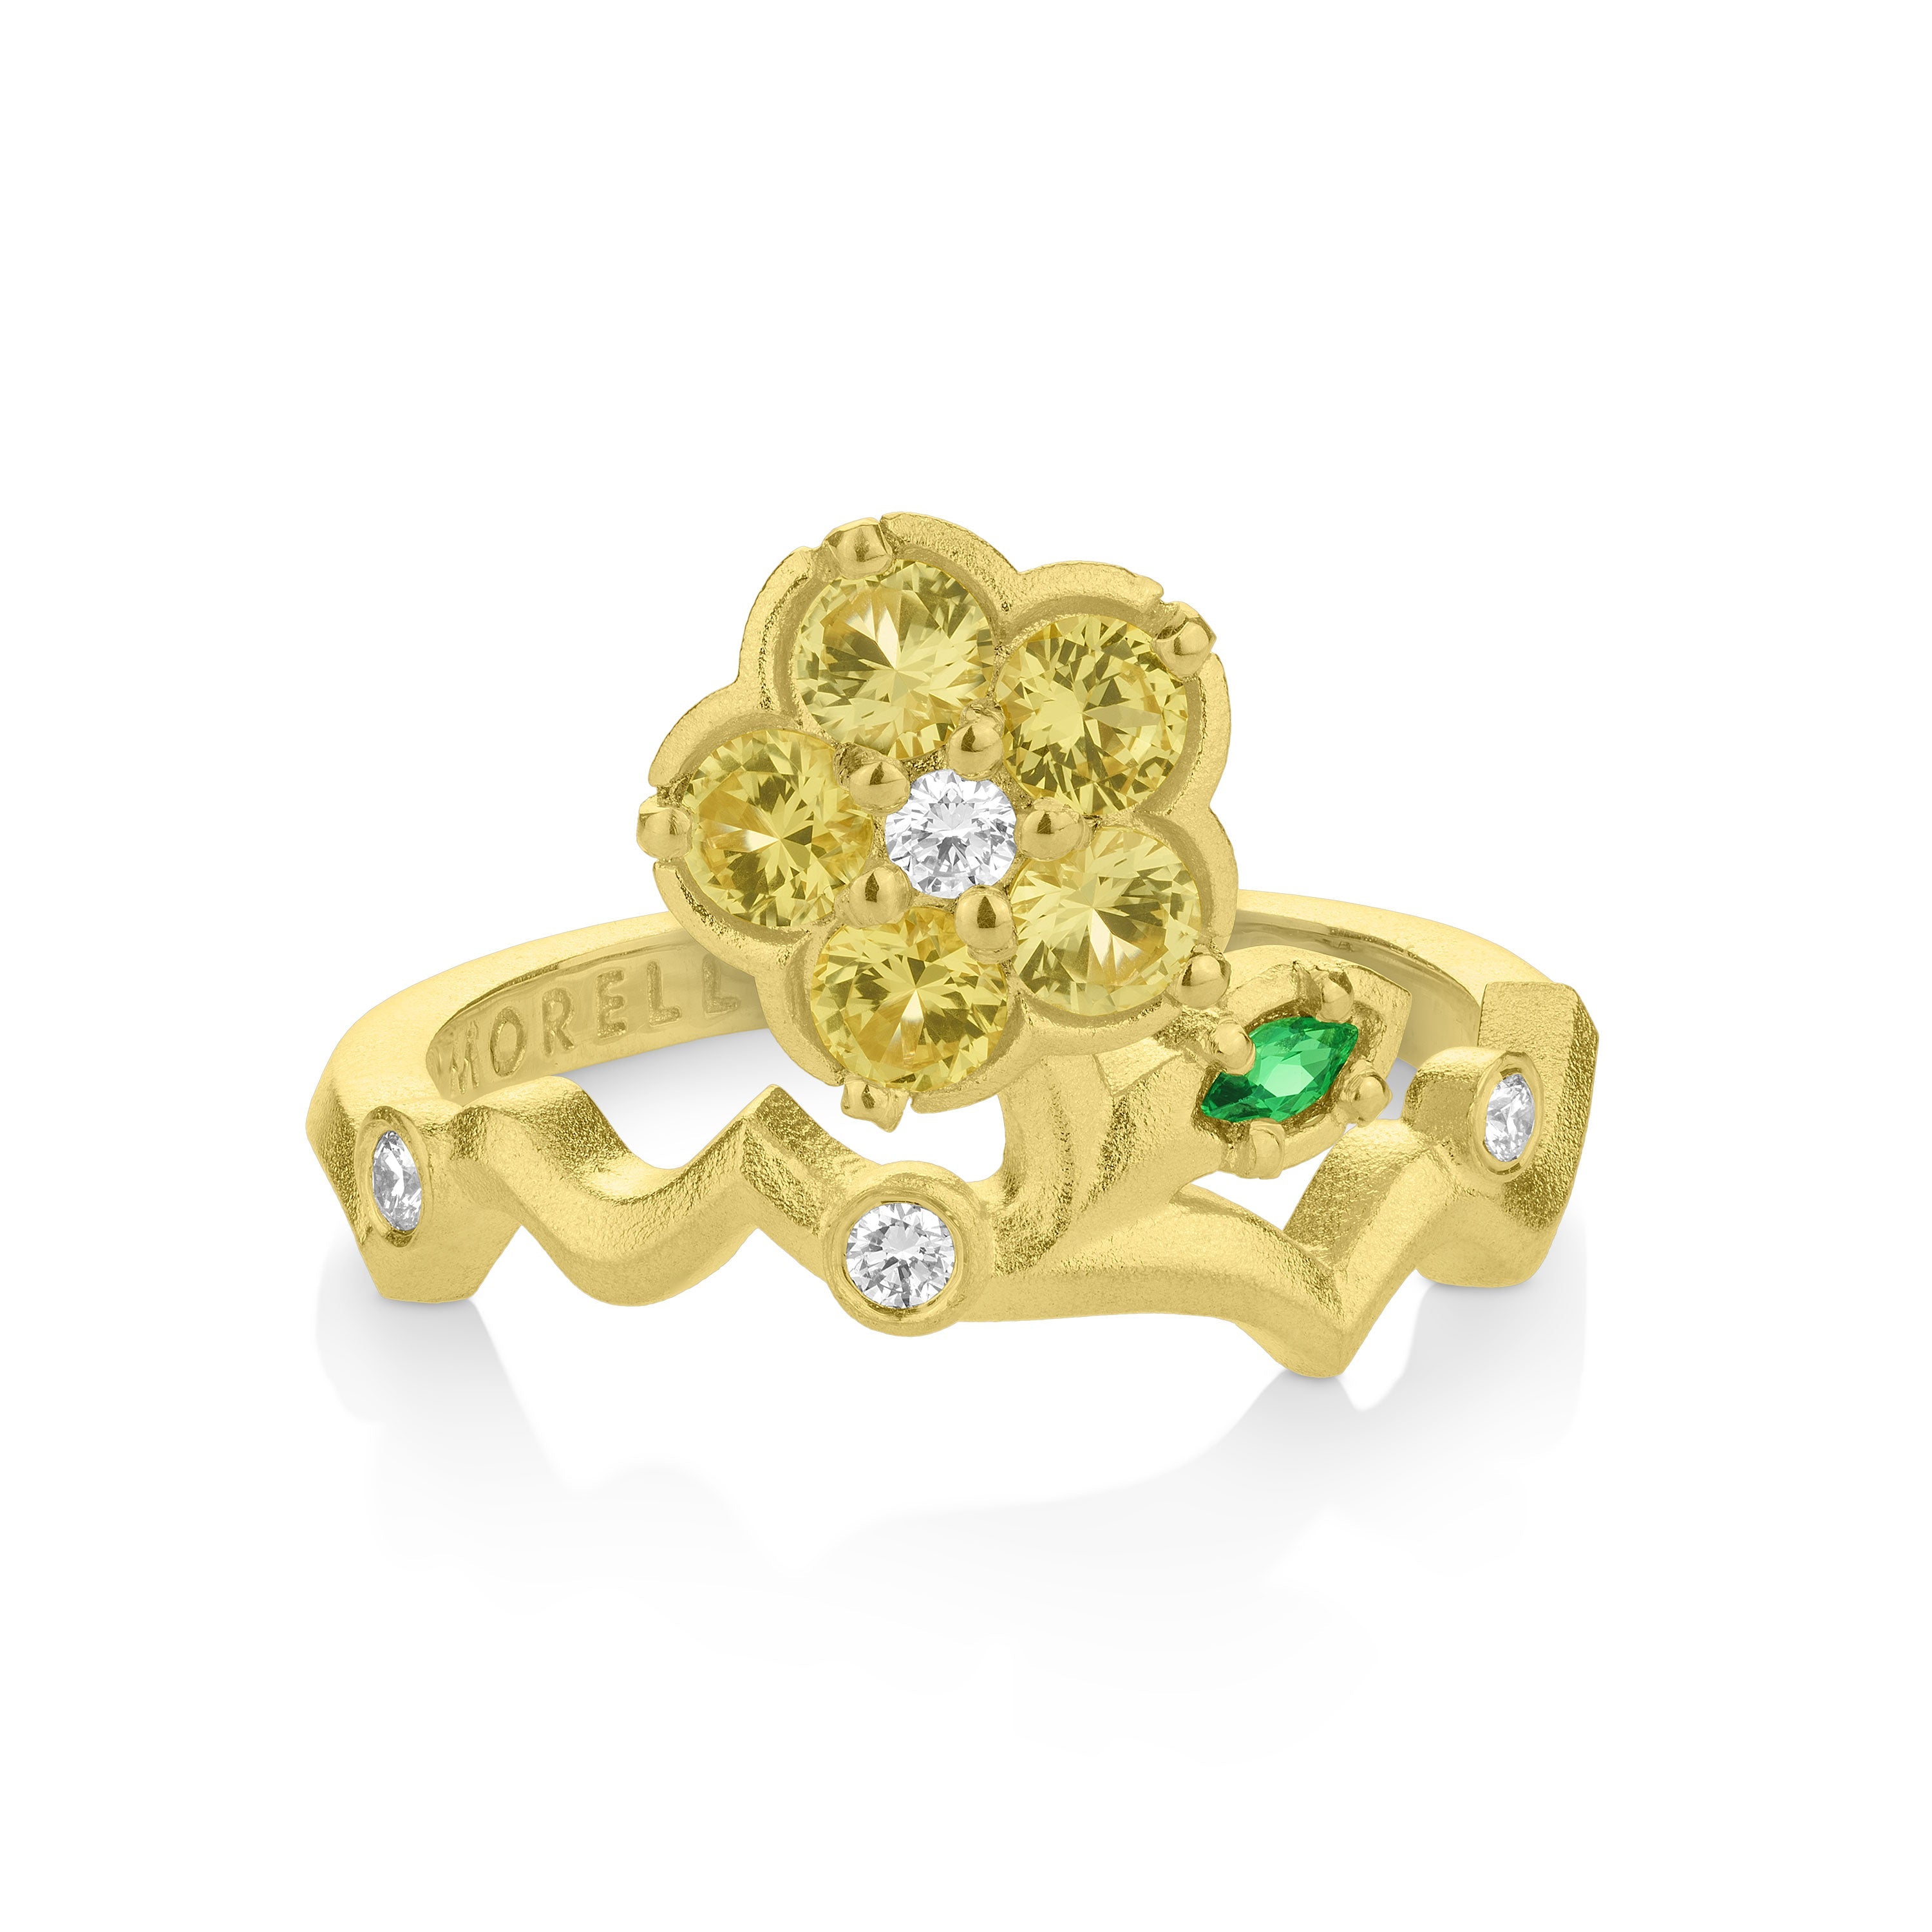 Paul Morelli Wild Child Ring with Yellow Sapphire - Be On Park